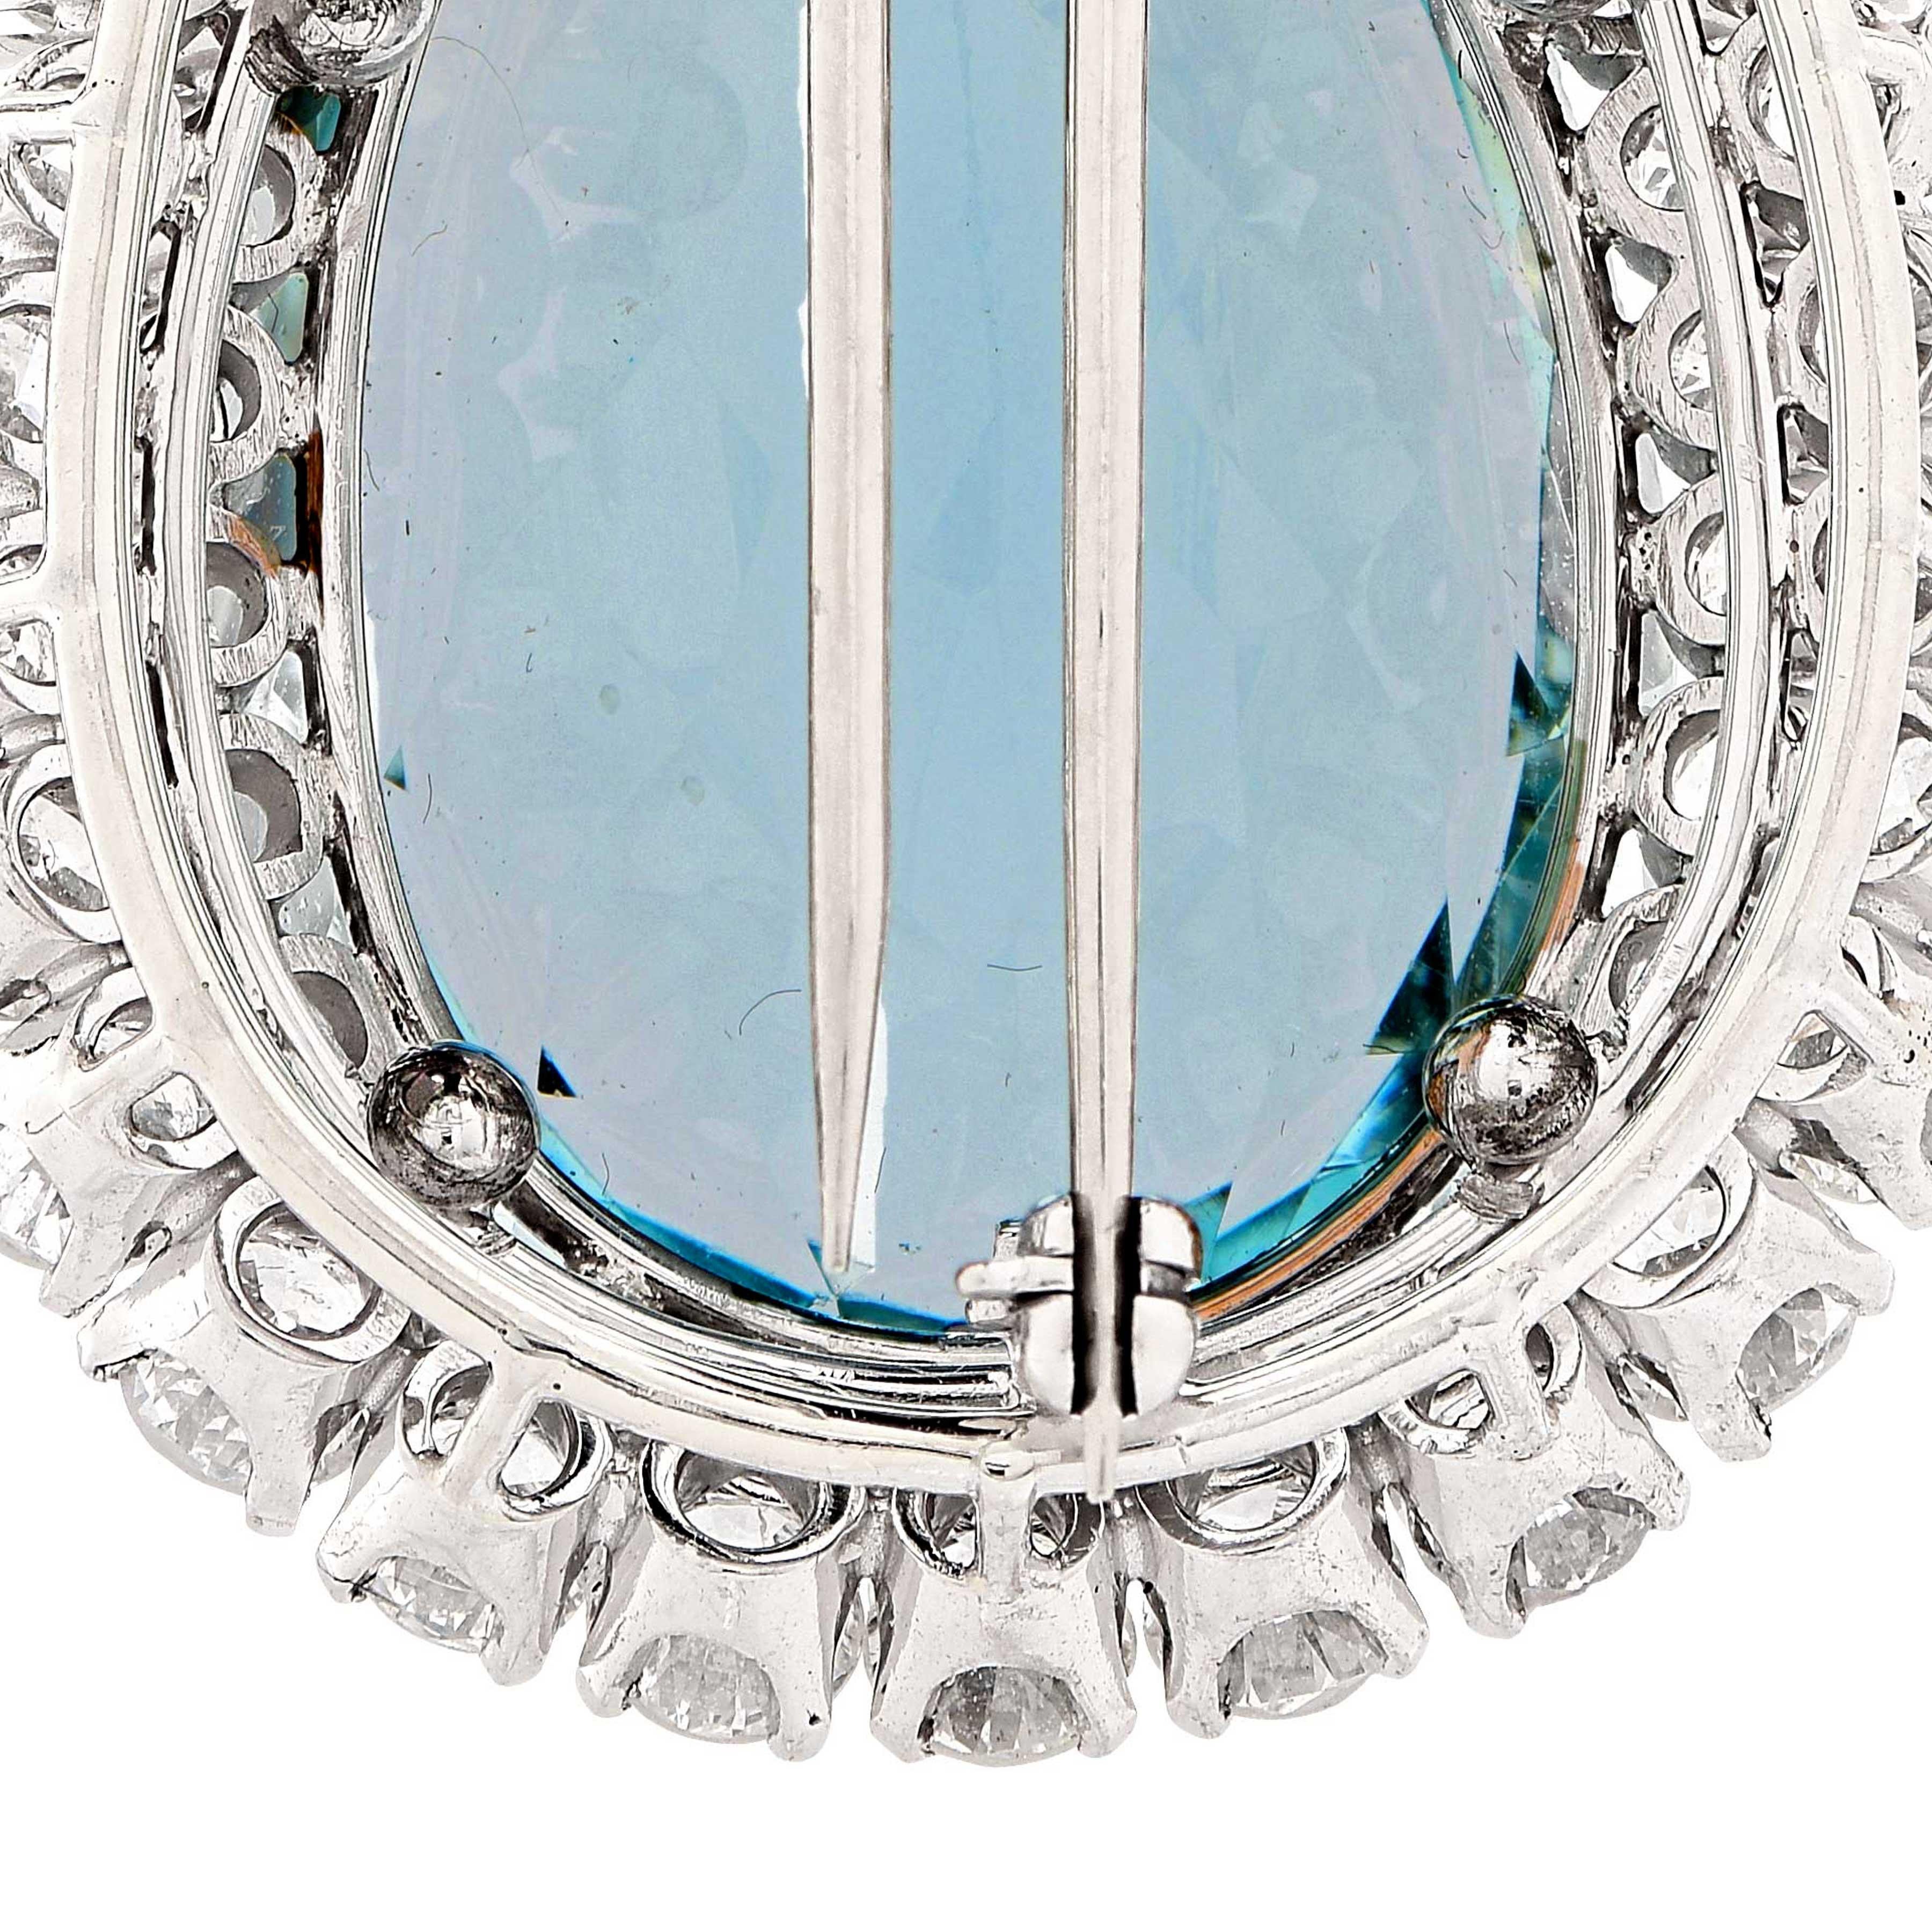 This gorgeous 35 carat aquamarine and diamond platinum brooch features a natural aquamarine surrounded by 62 round brilliant cut diamonds with an estimated total weight of 4.5 carats